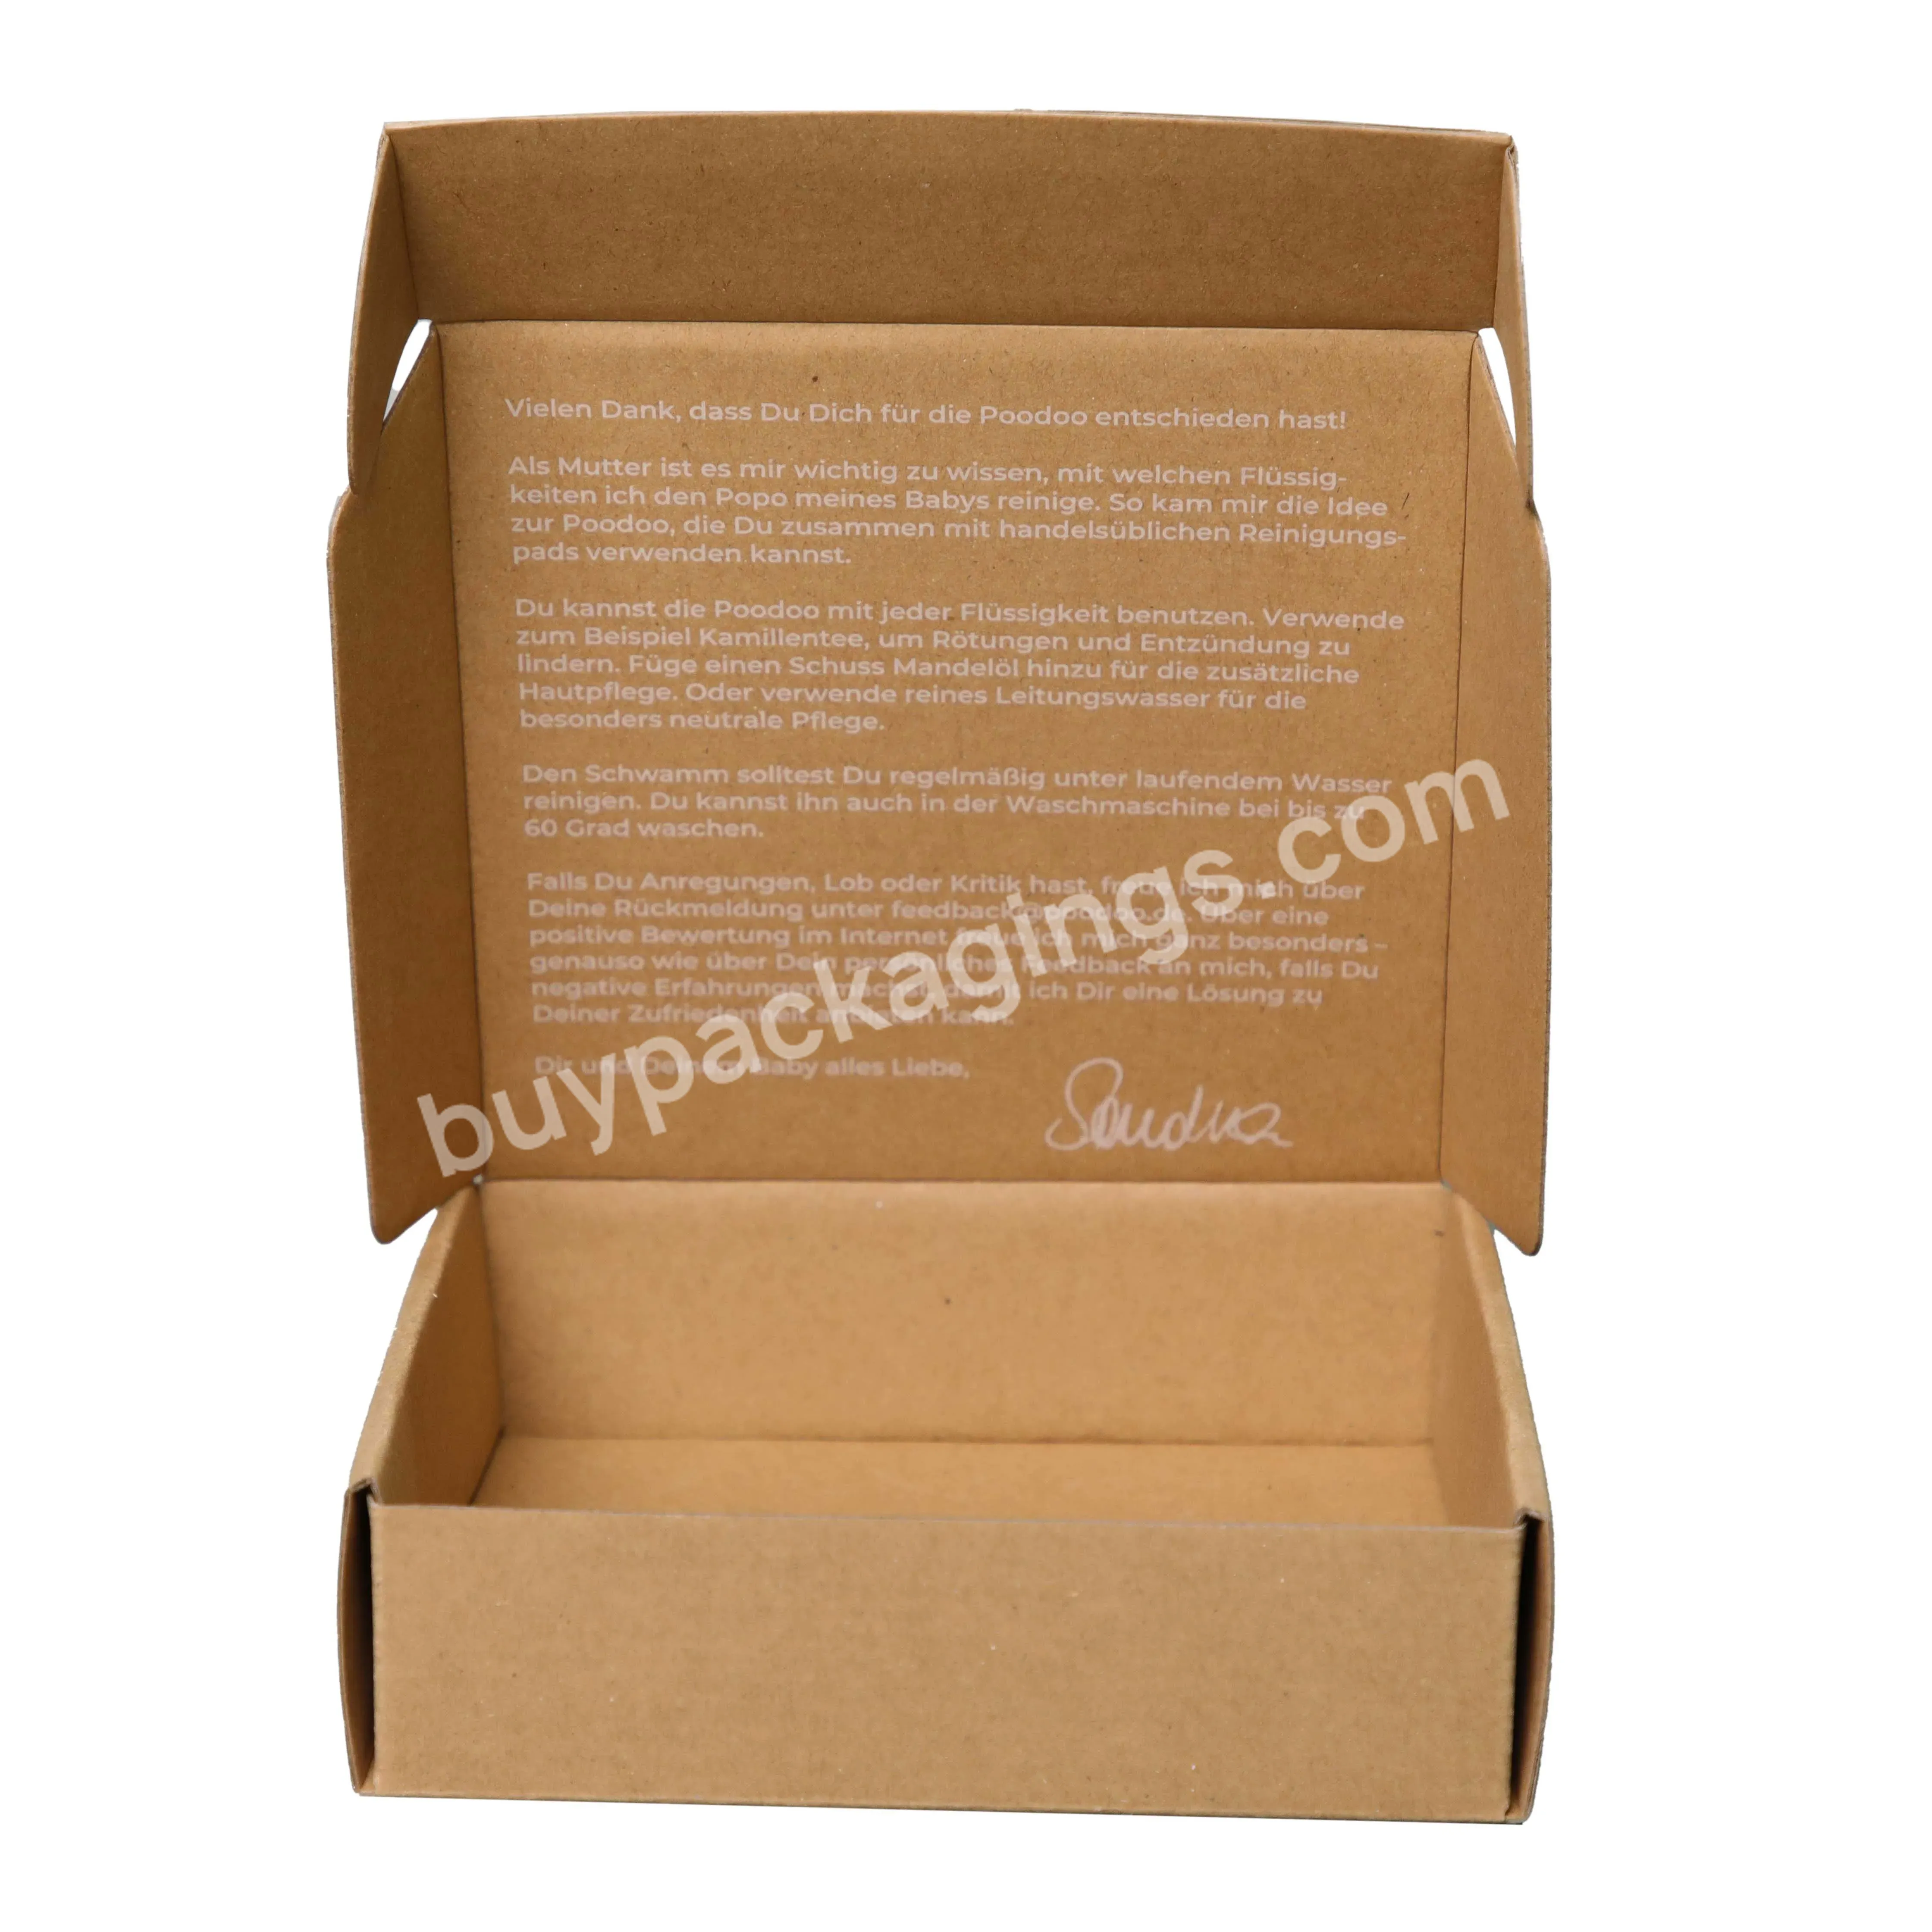 Hot Sale Custom Printing Luxury Gold Foil Cosmetic Gift Box Shipping Mailer Boxes With High Quality - Buy Mailer Box,Packaging Box,Gift Box.